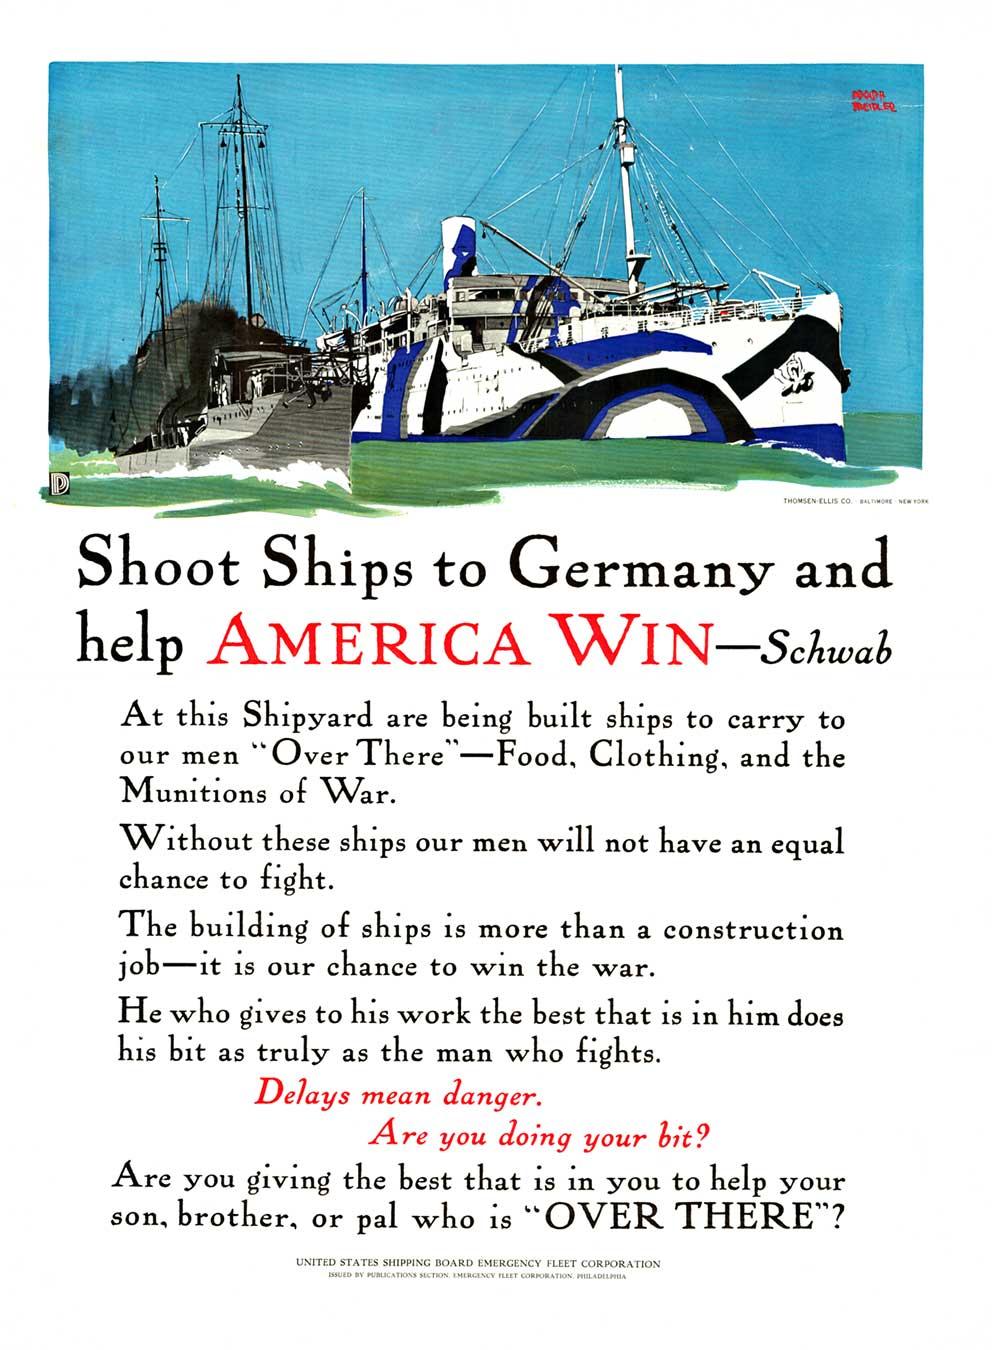 Original poster:  Shoot Ships to Germany.  At this Shipyard are being built ships to carry to our men 